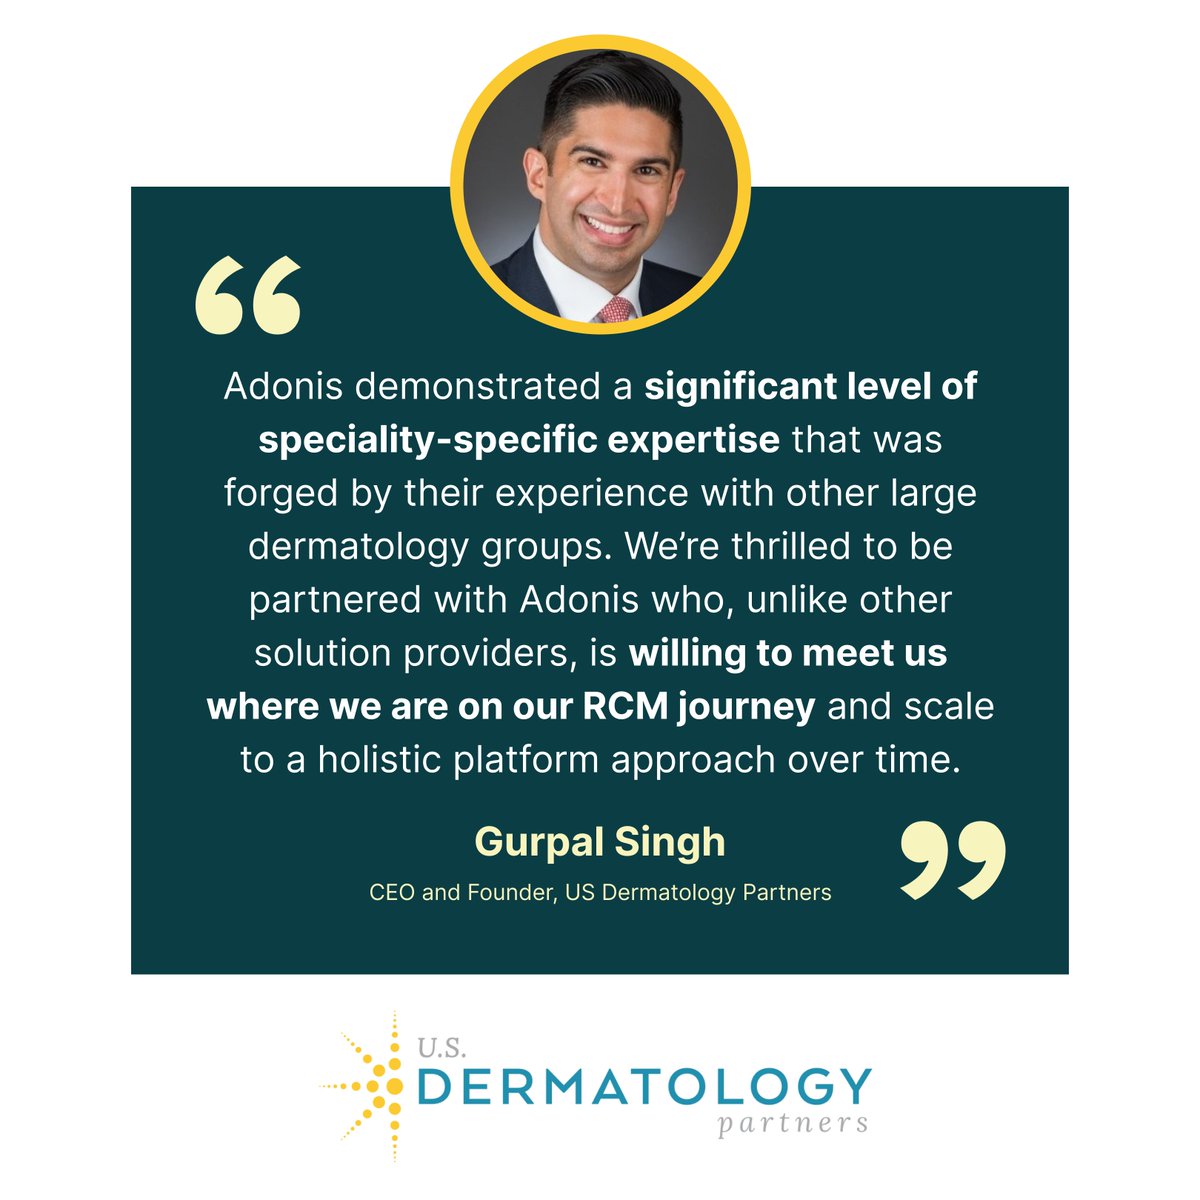 🚨For Adonis, our customers are always our top priority and we are honored each time a customer comes back with positive feedback... Here is a quick recap from our recent partnership announcement with U.S. Dermatology,